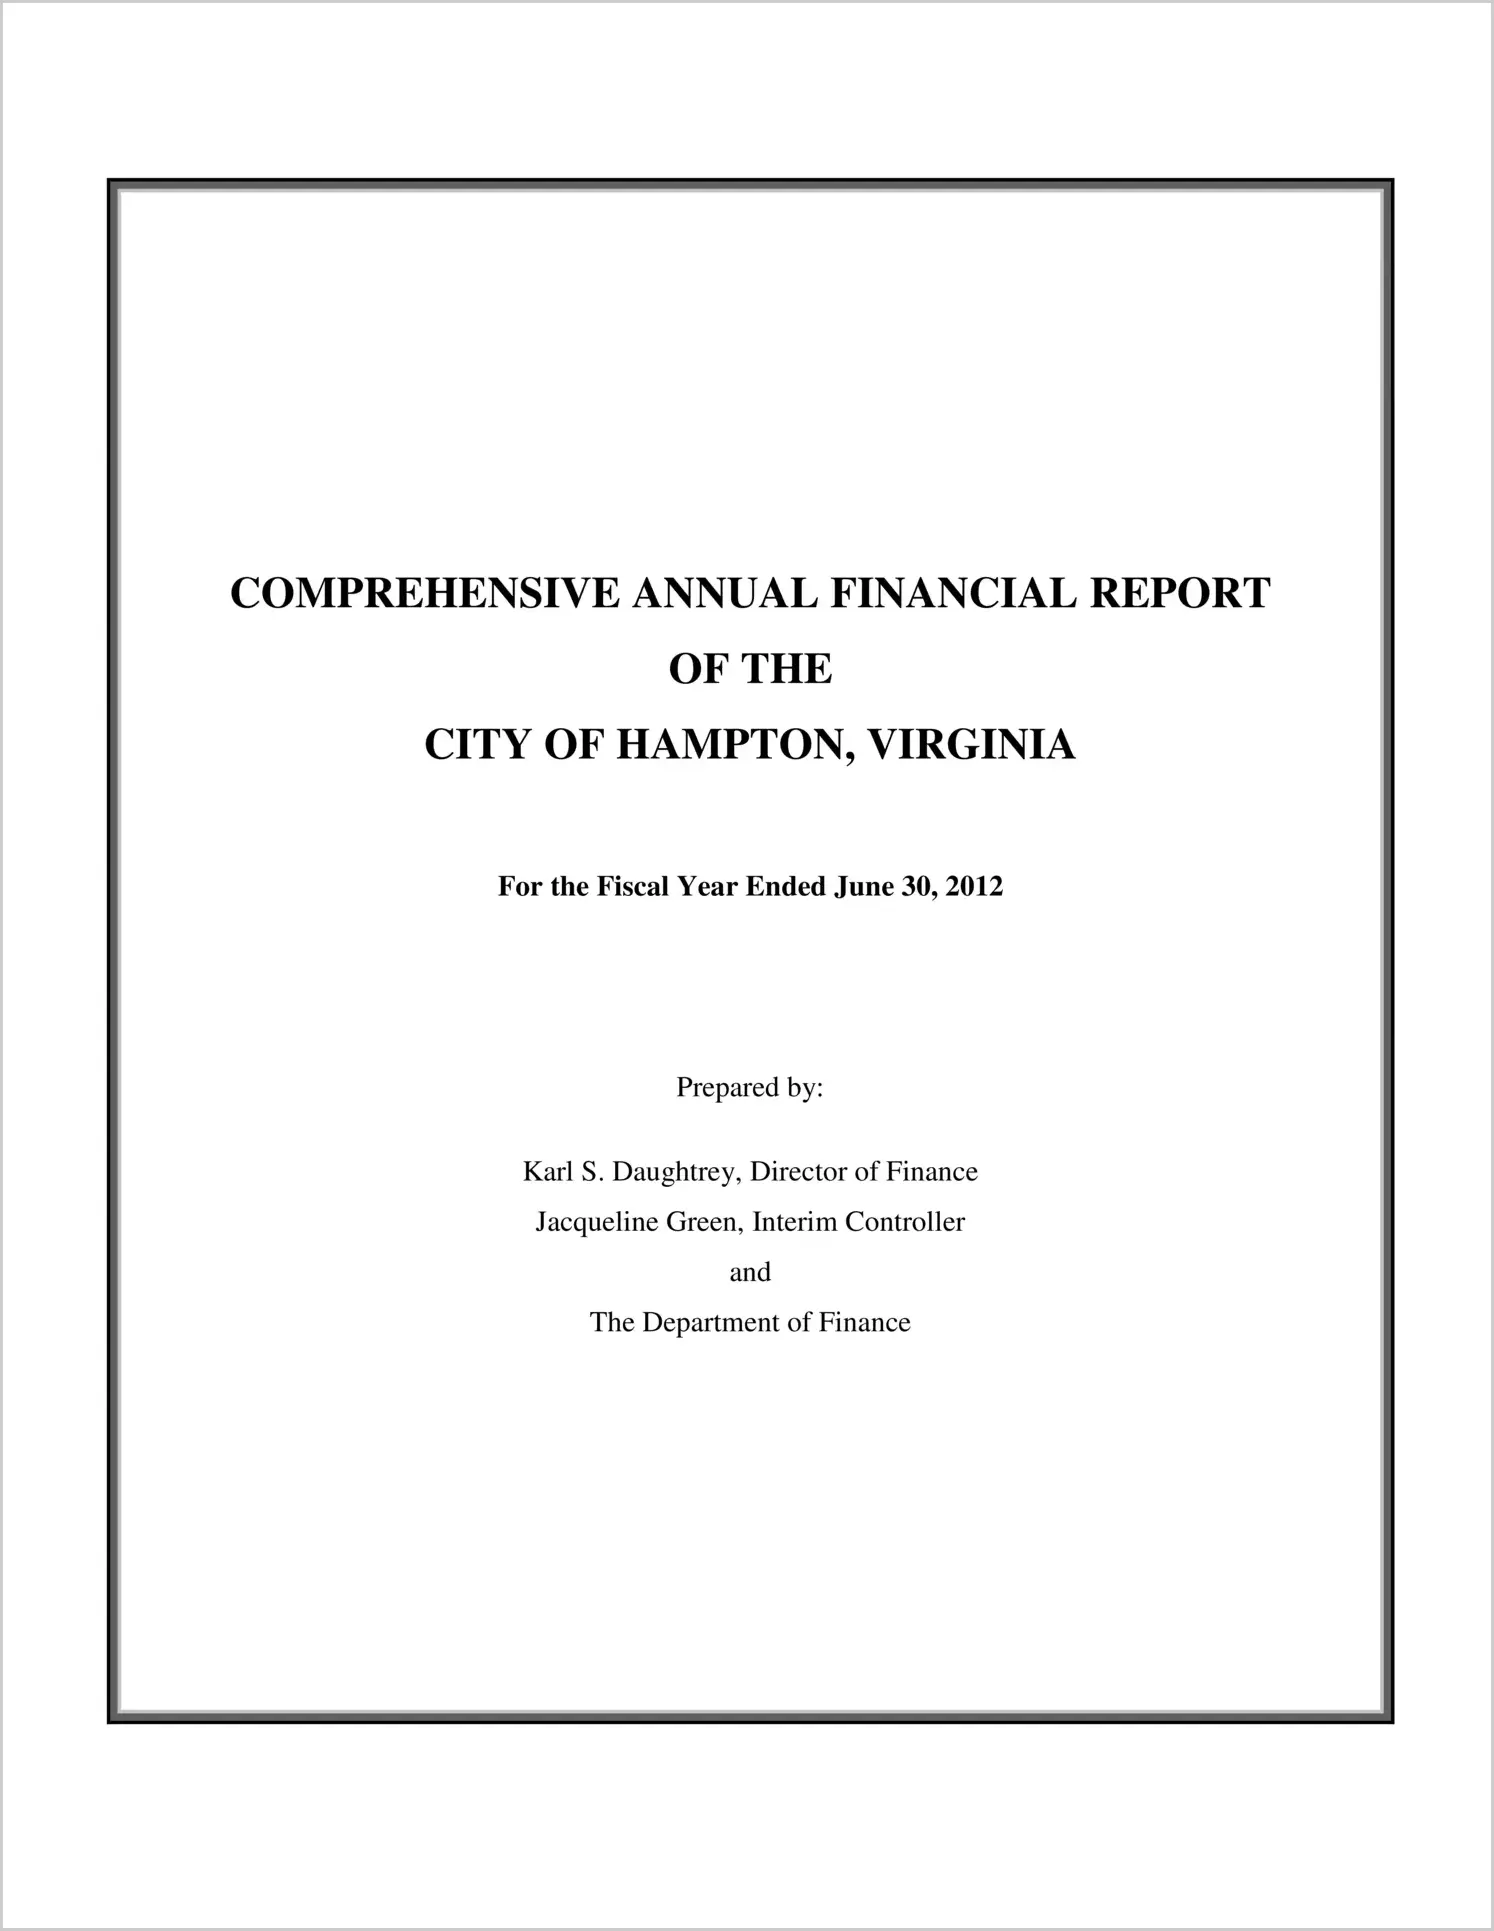 2012 Annual Financial Report for City of Hampton